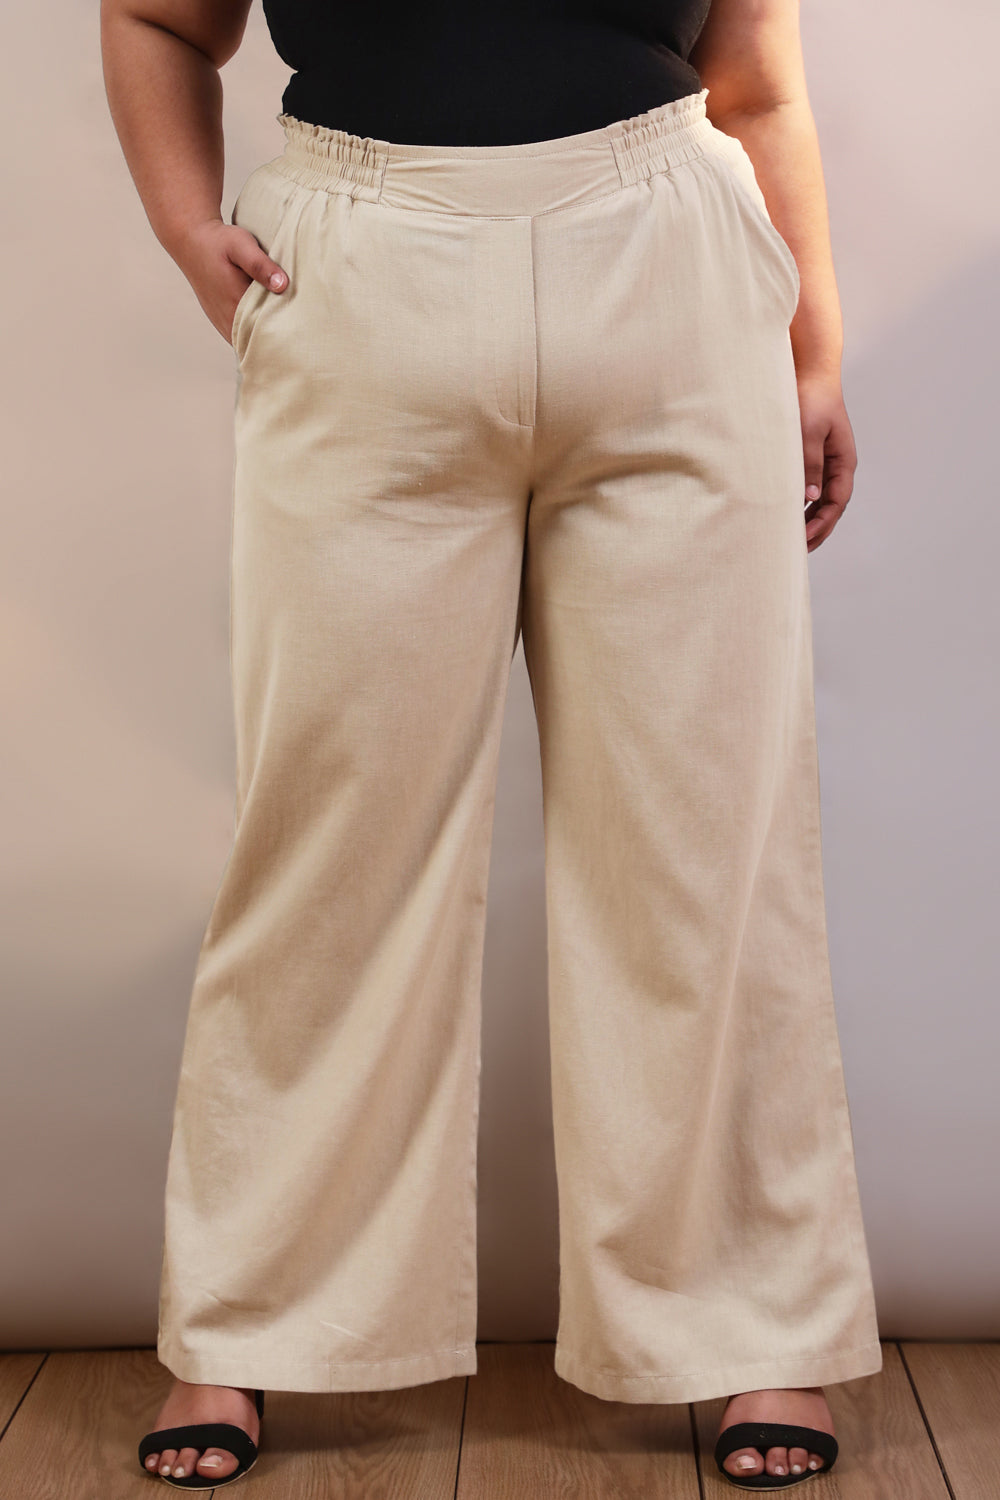 Trousers Elastic Pencil Pants High Waist Pants Women Plus Size High Waisted  Trousers Skinny Pants, हाई वेस्टेड पैंट - My Online Collection Store,  Bengaluru